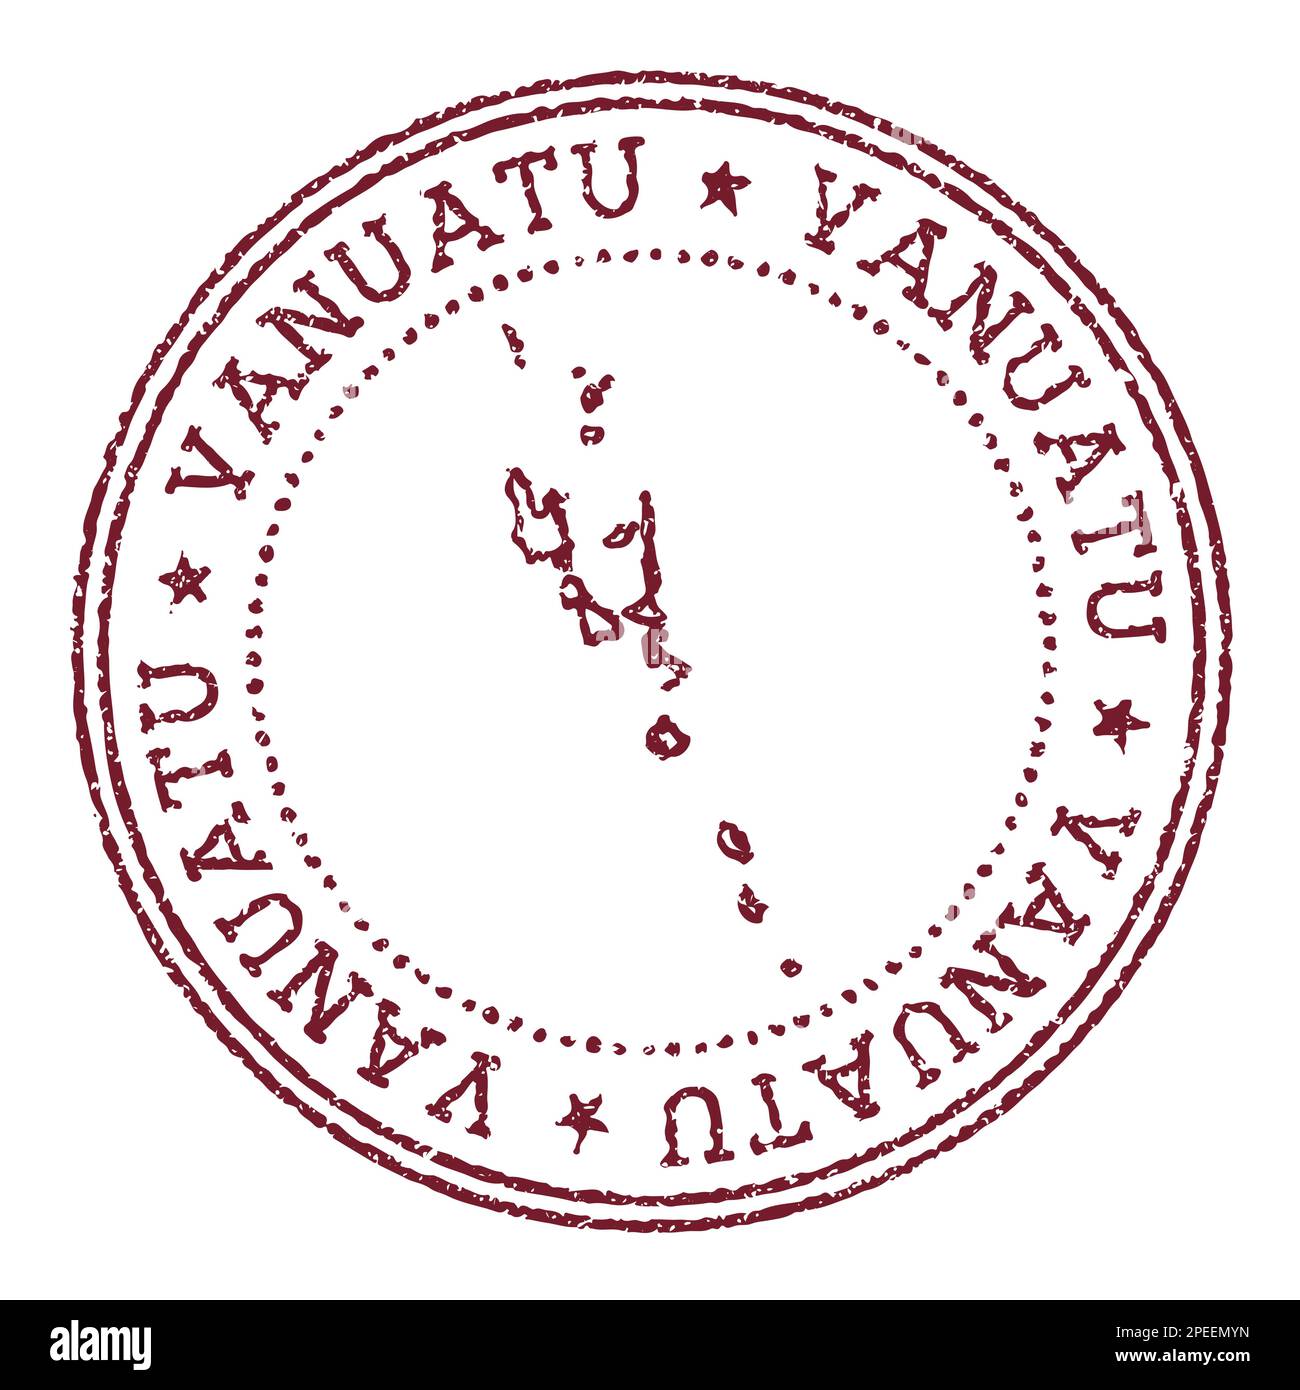 Vanuatu round rubber stamp with country map. Vintage red passport stamp with circular text and stars, vector illustration. Stock Vector